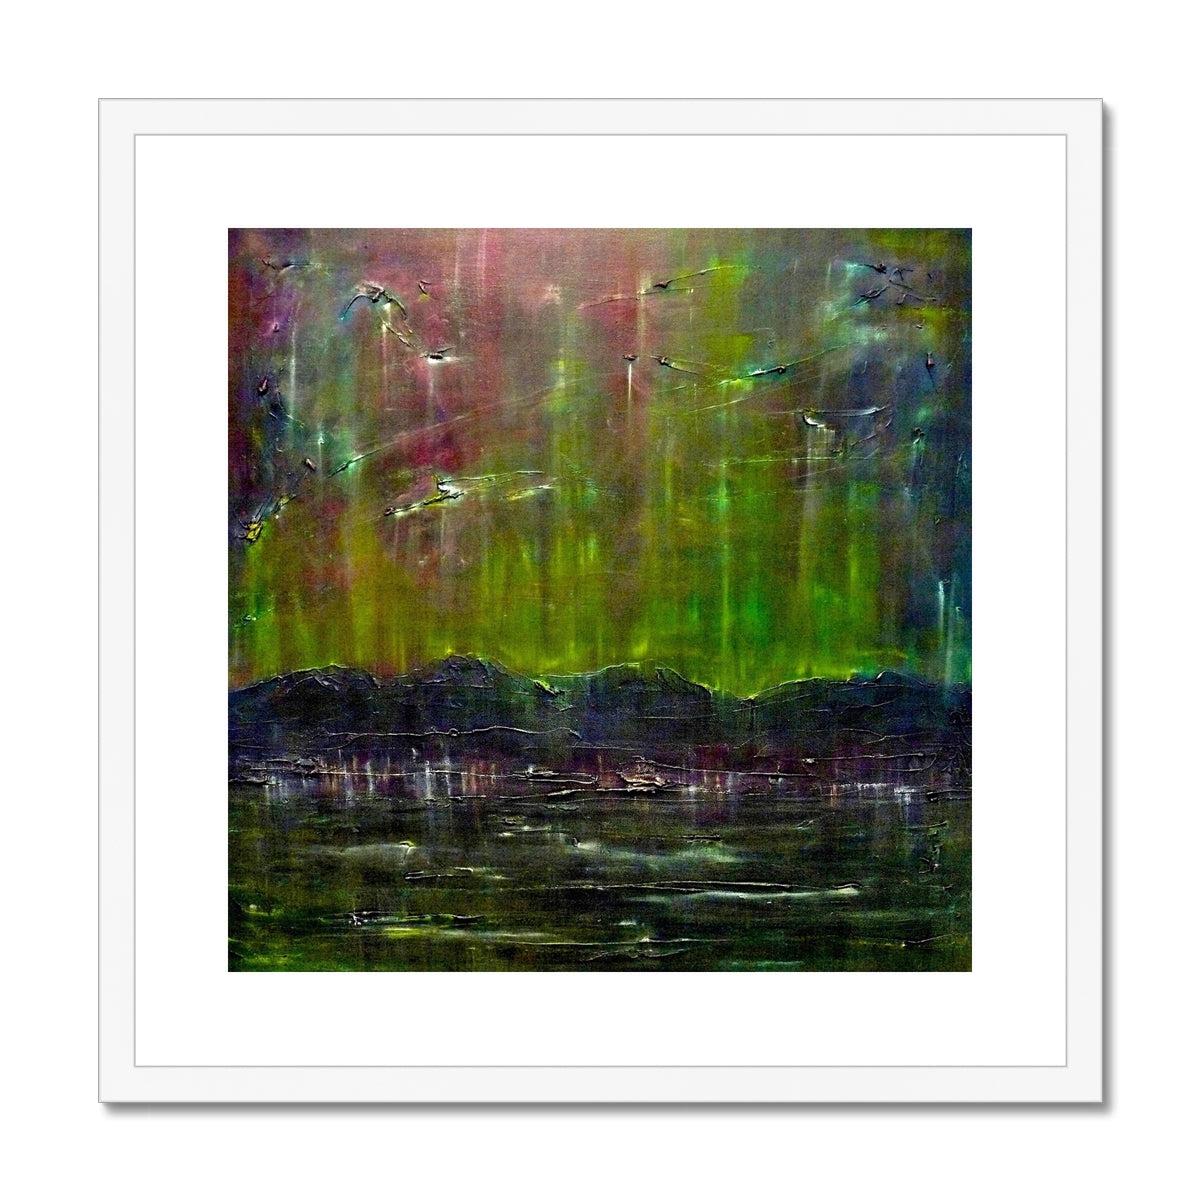 Cromarty Harbour Northern Lights Painting | Framed & Mounted Prints From Scotland-Framed & Mounted Prints-Scottish Highlands & Lowlands Art Gallery-20"x20"-White Frame-Paintings, Prints, Homeware, Art Gifts From Scotland By Scottish Artist Kevin Hunter